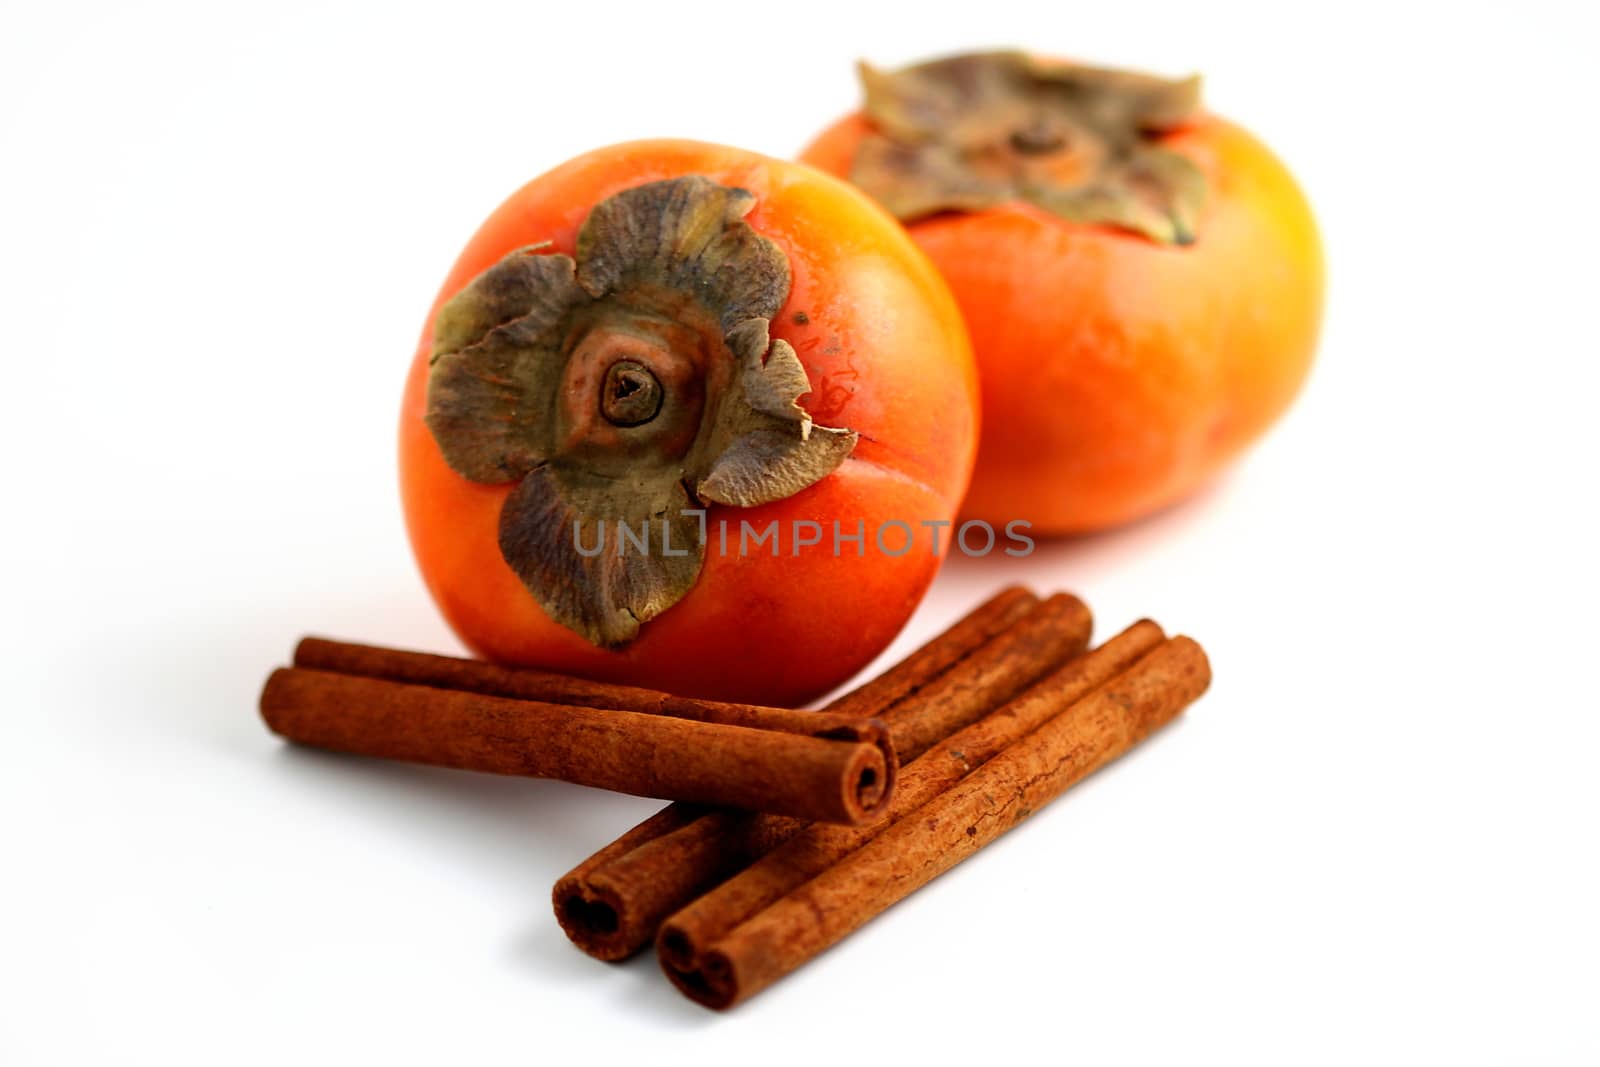 Closeup of persimmons and cinamon on white background.